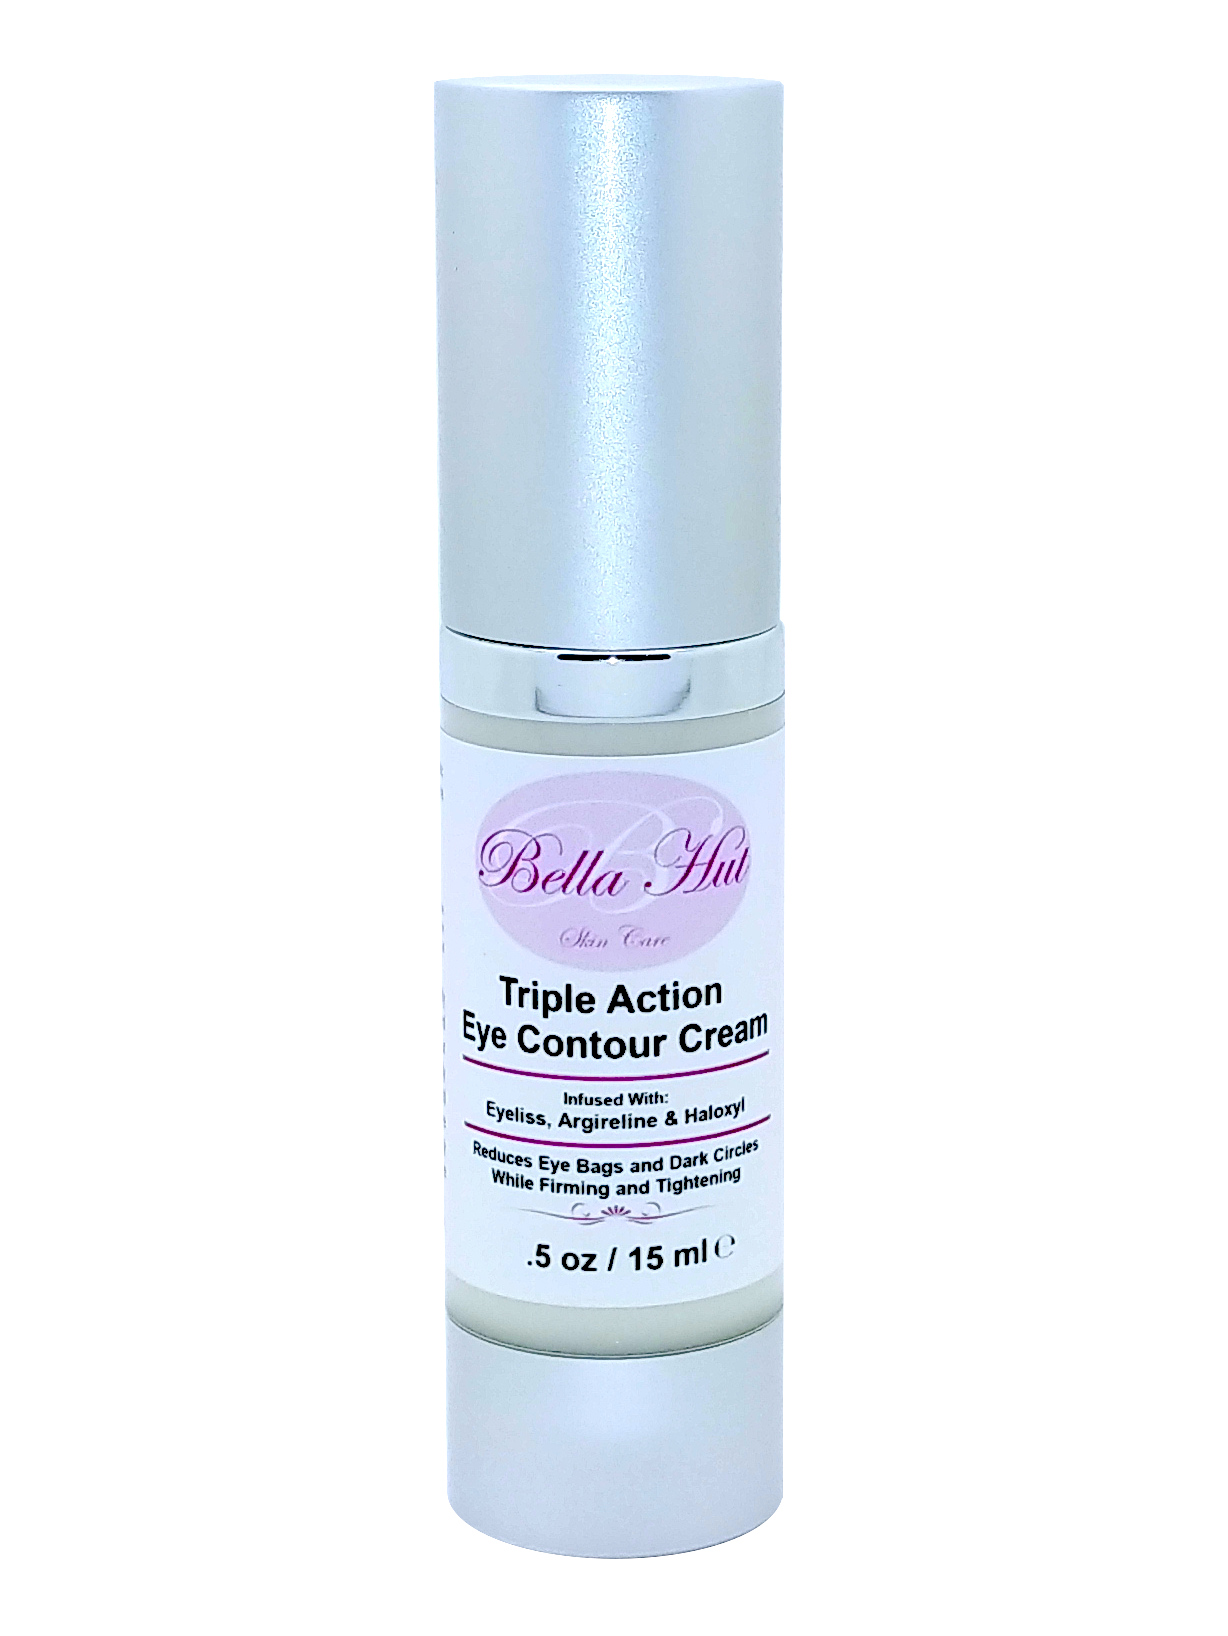 Triple Action Eye Contour Cream with Acetyl hexapeptide-3 Eyeliss And Haloxyl firms and and tightens around the eyes